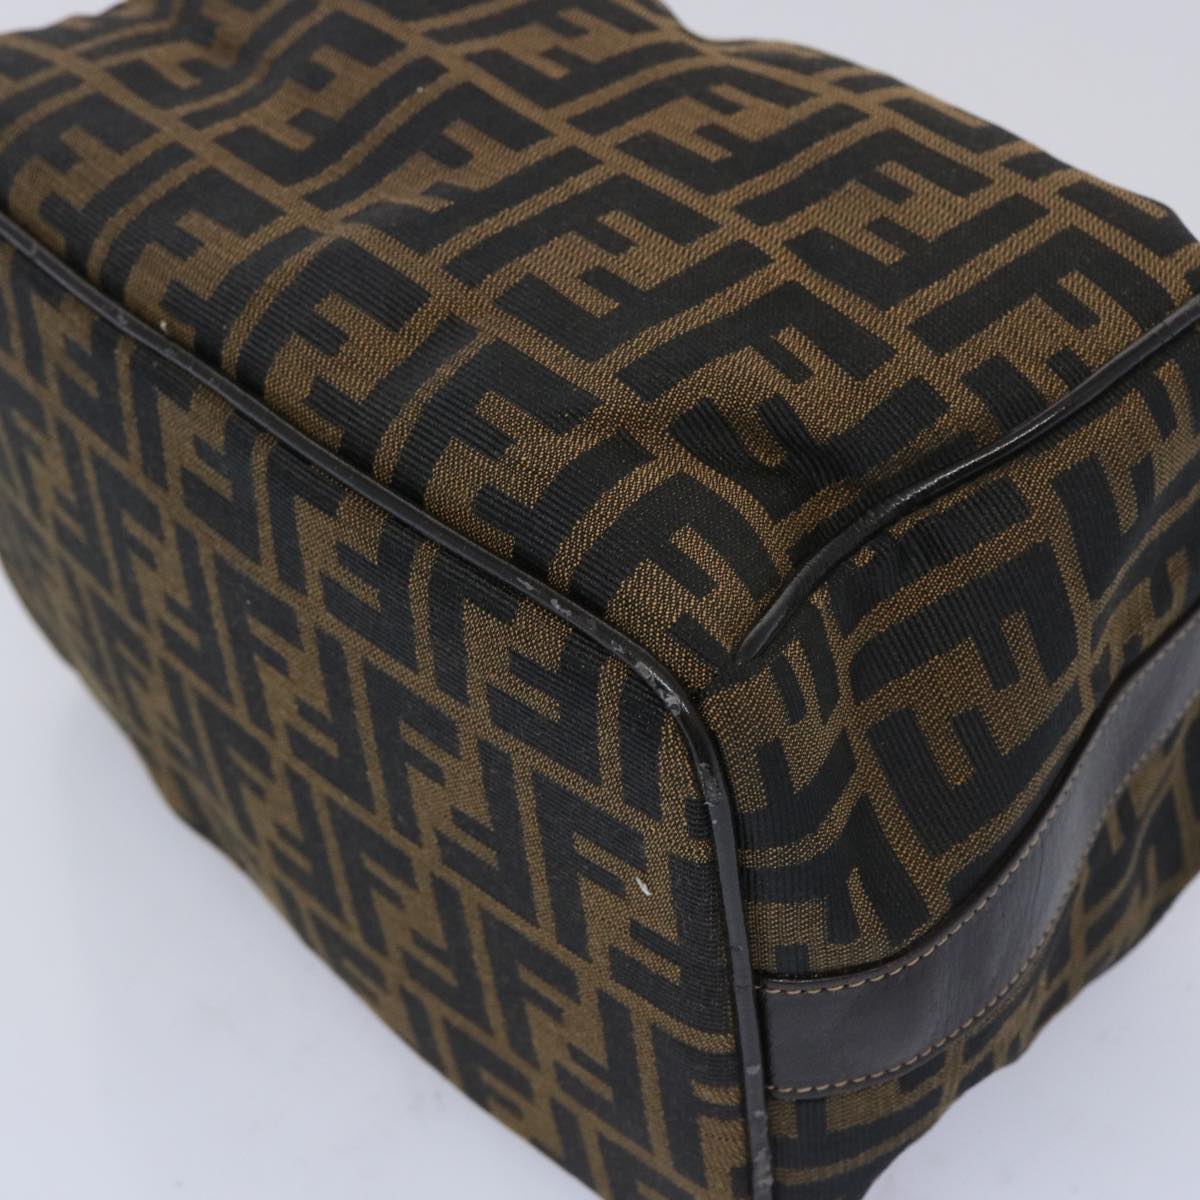 FENDI Zucca Canvas Vanity Cosmetic Pouch Brown Black Auth 65535